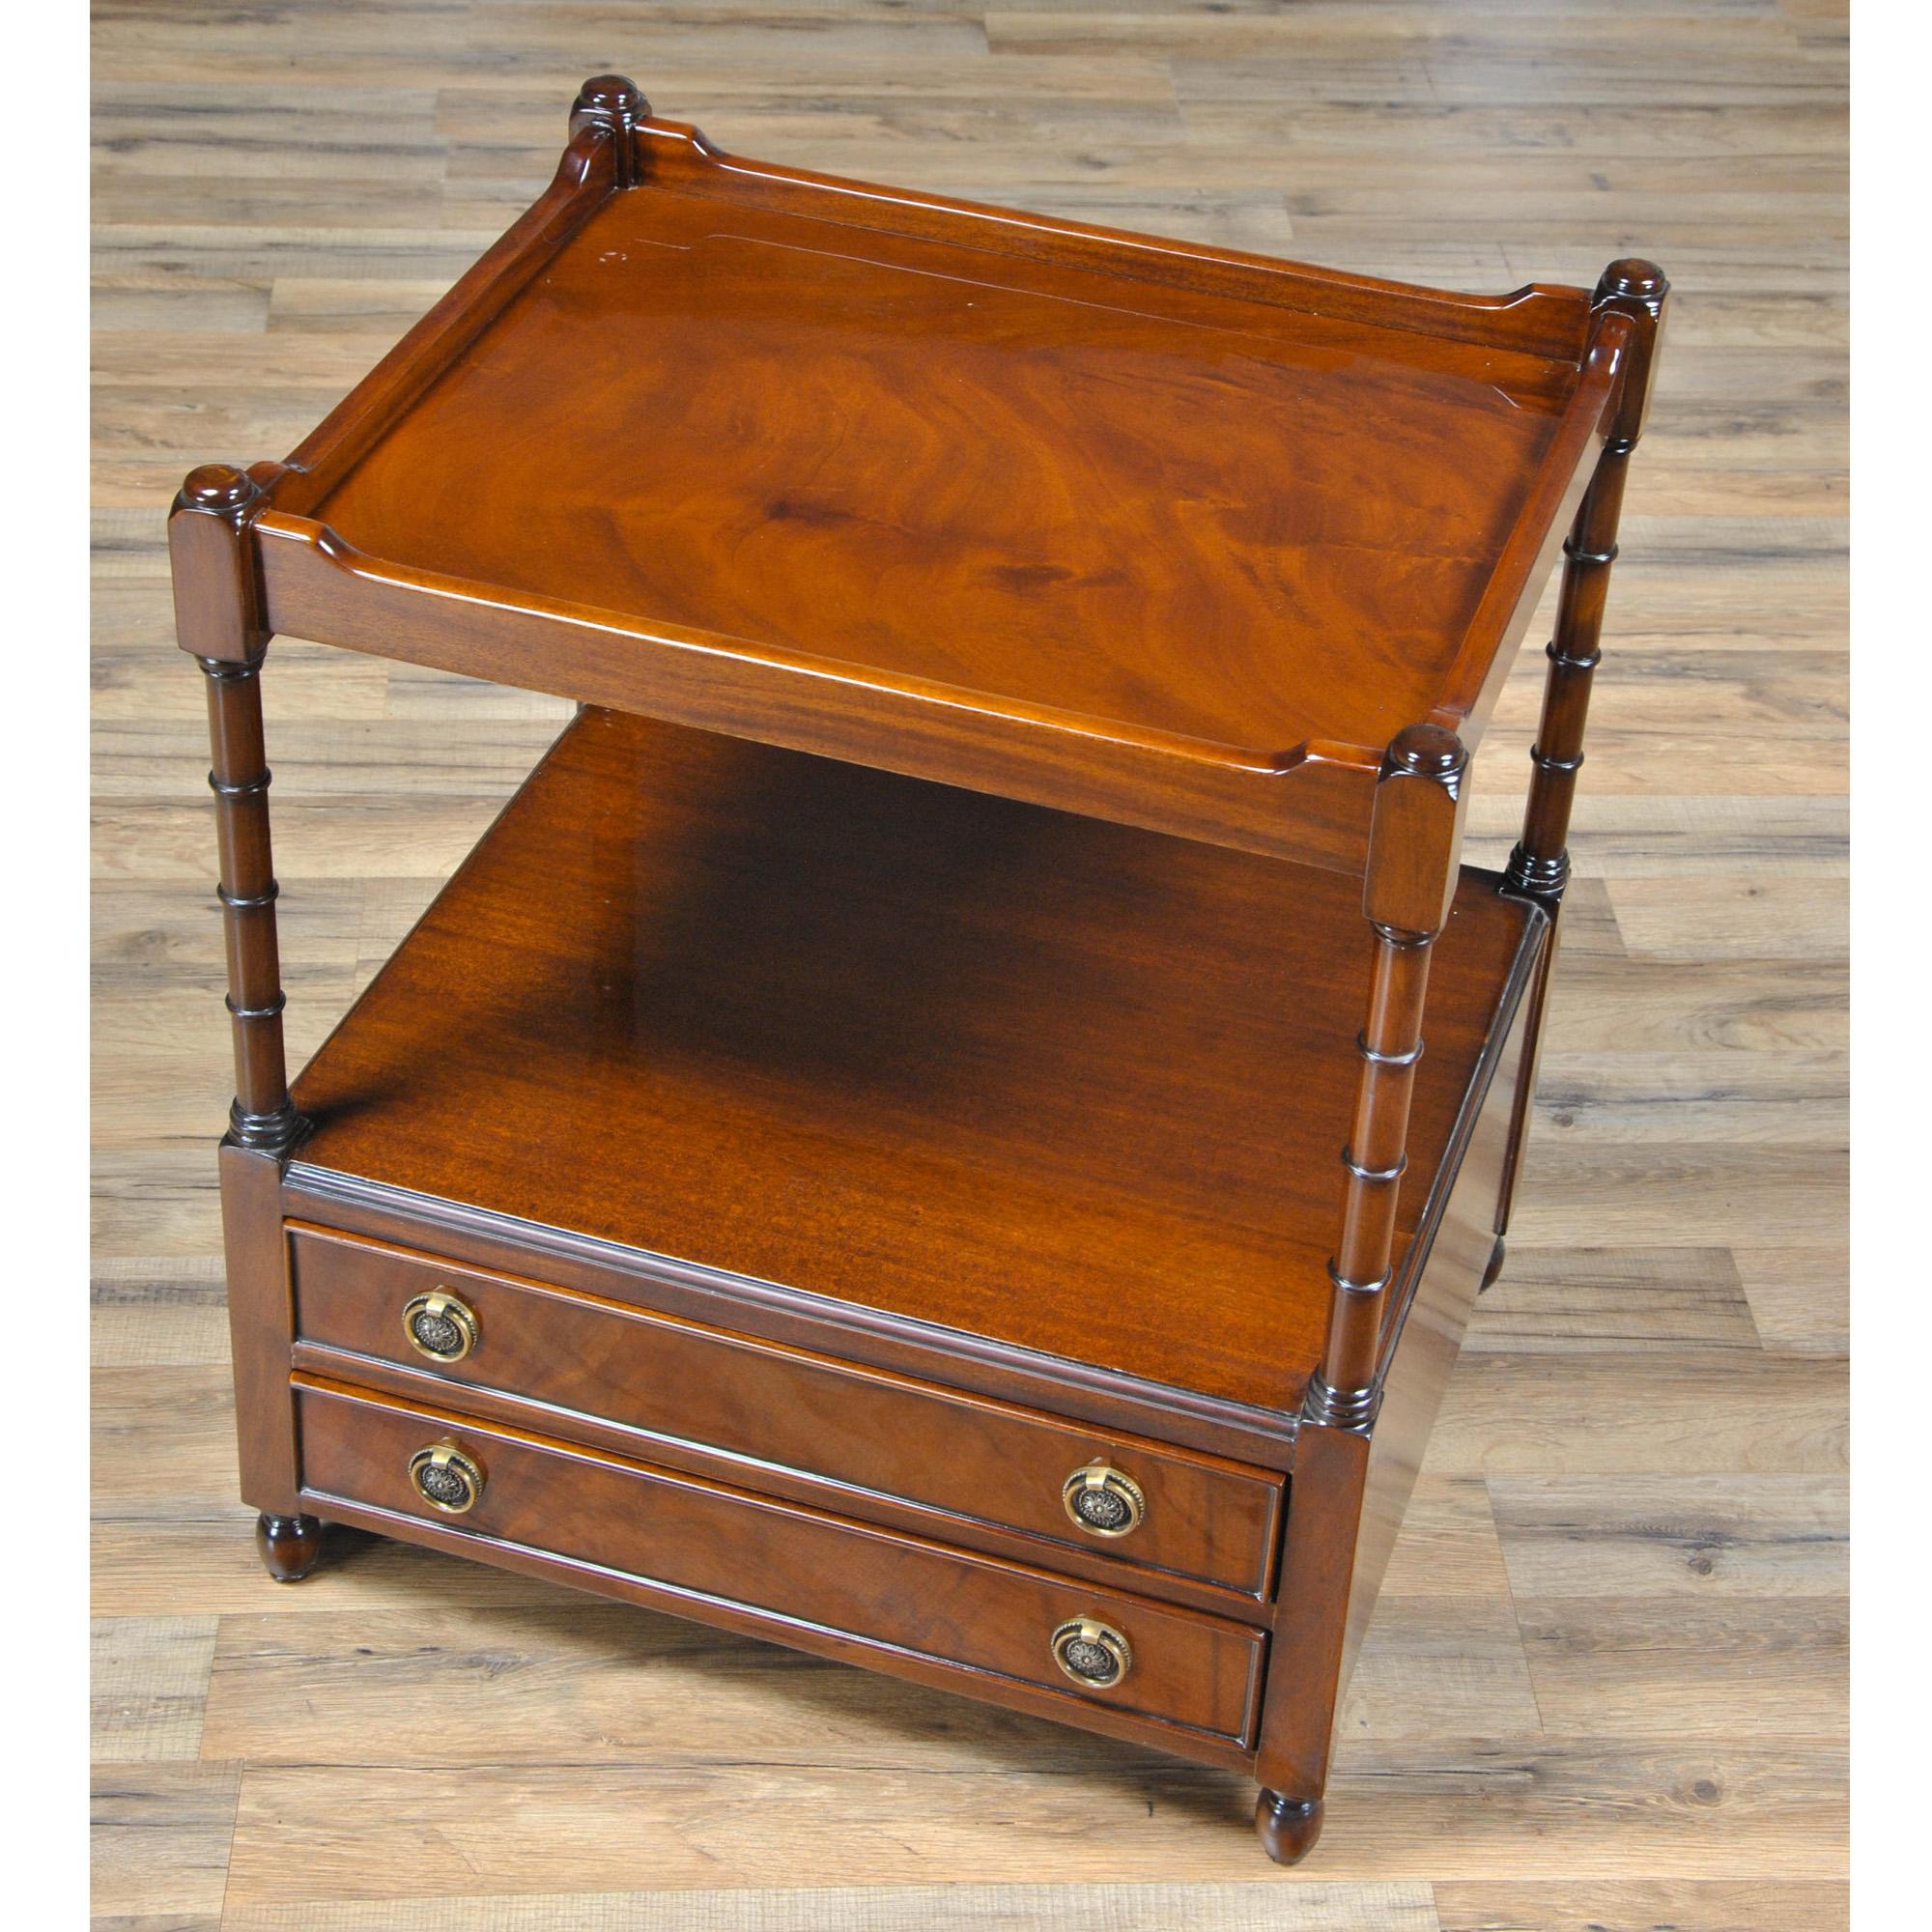 Popular for centuries this style of  Large Turned Leg Table was first produced as an etagere which, once broken or damaged, would have been cut down to make an end table as you see here. They were in such high demand that cabinet makers began